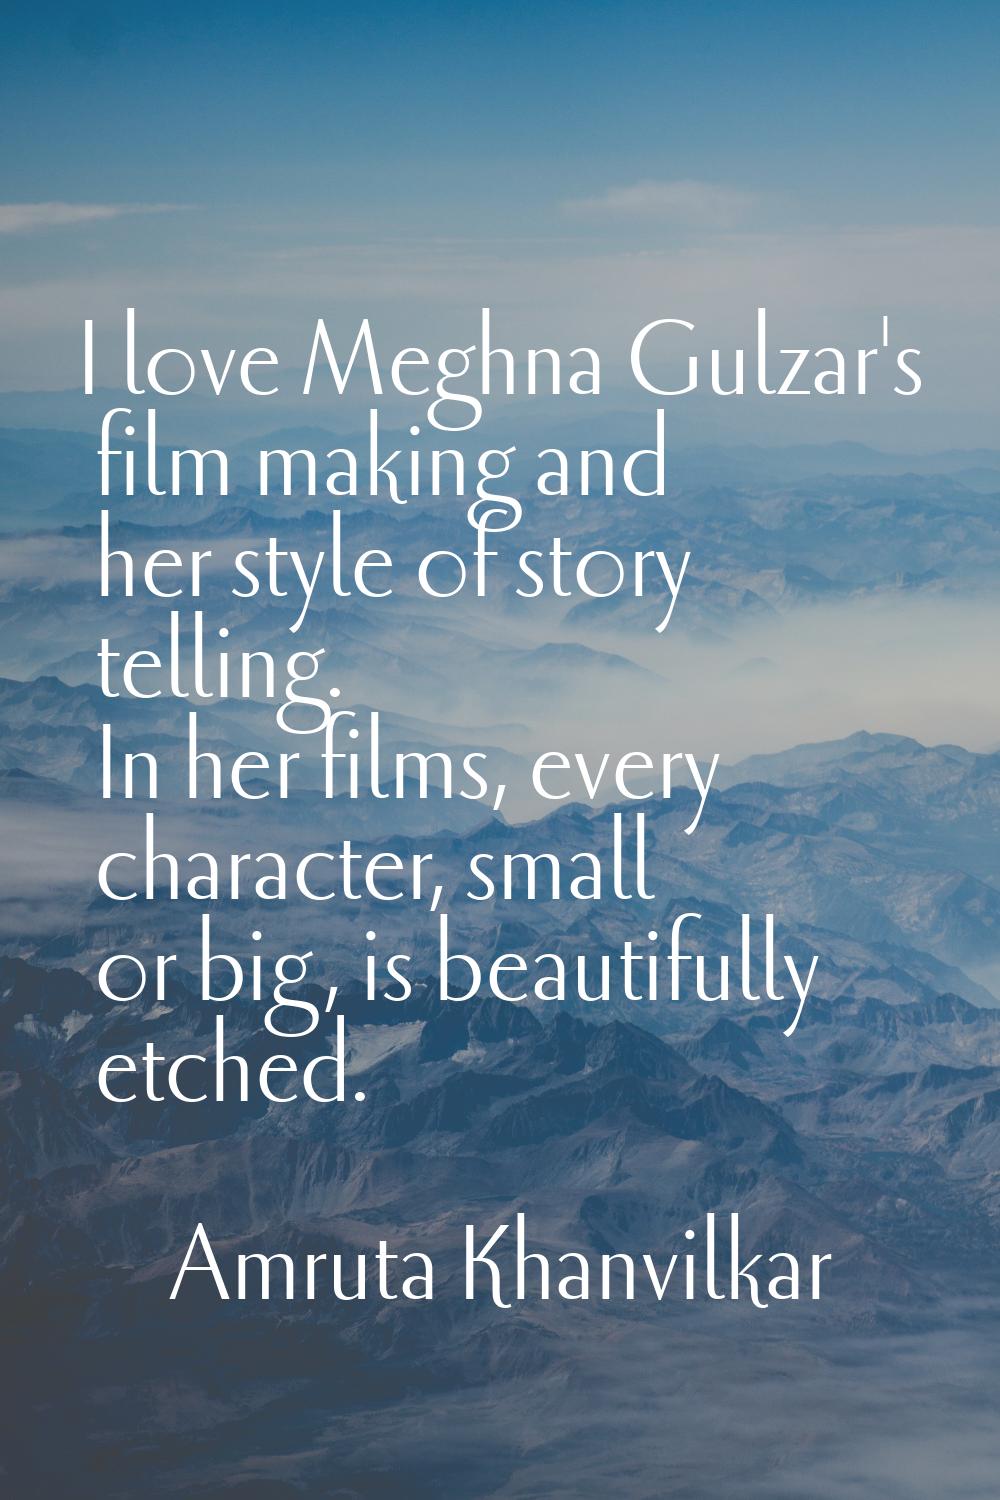 I love Meghna Gulzar's film making and her style of story telling. In her films, every character, s